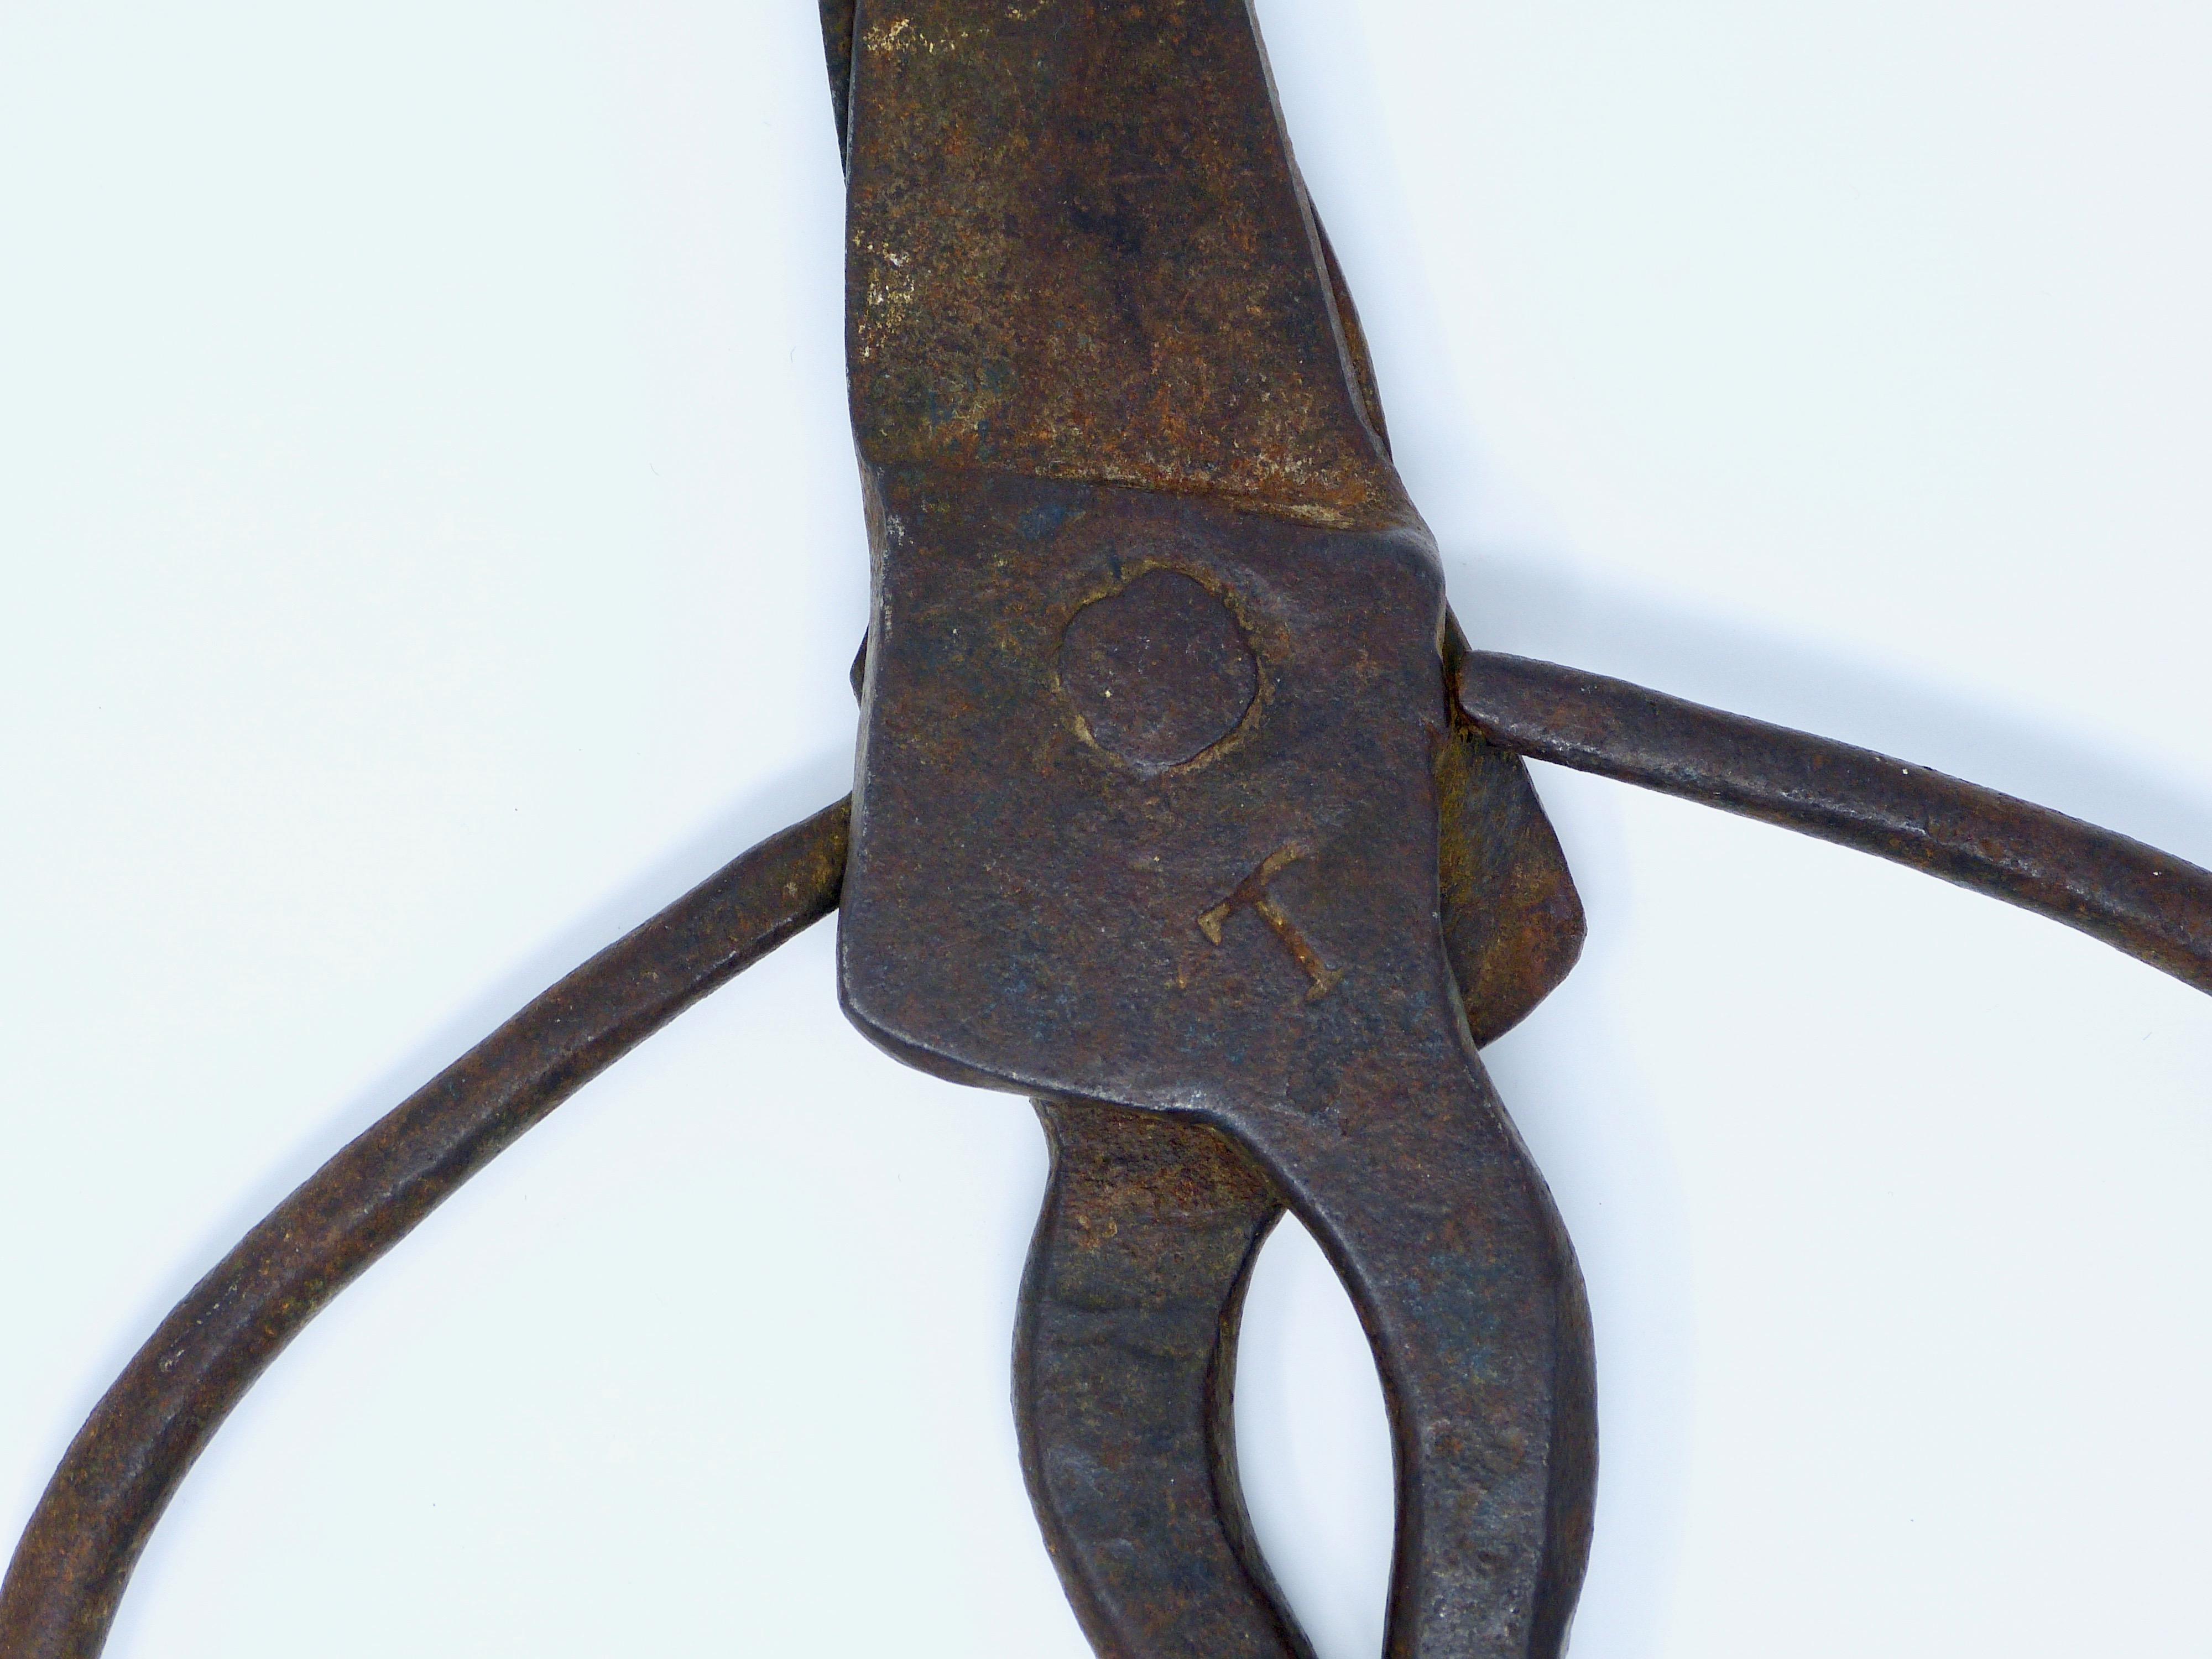 Colonial forged iron scissors 
19th century
Marked with a T
Weight 967 grams 
They were used to cut off sheep hair.